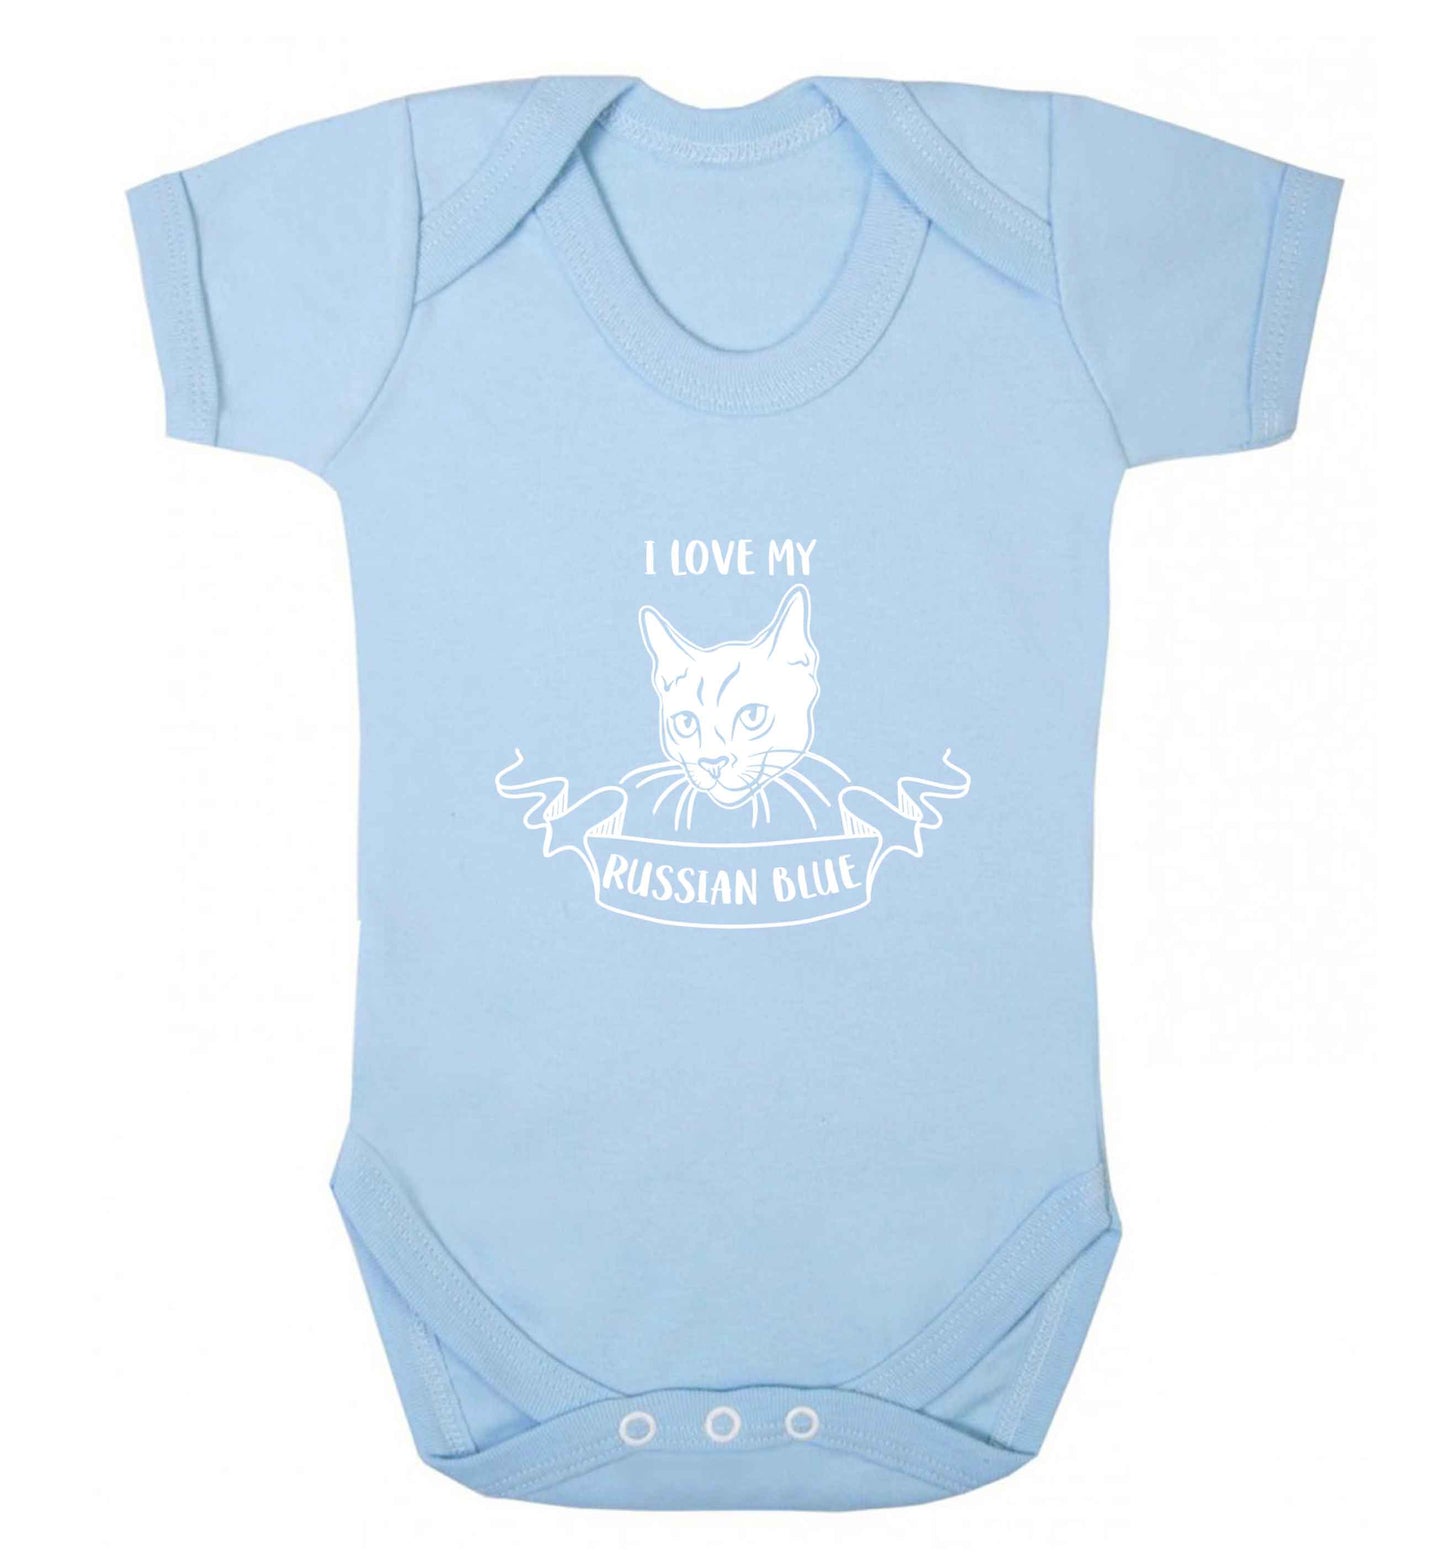 I love my russian blue baby vest pale blue 18-24 months